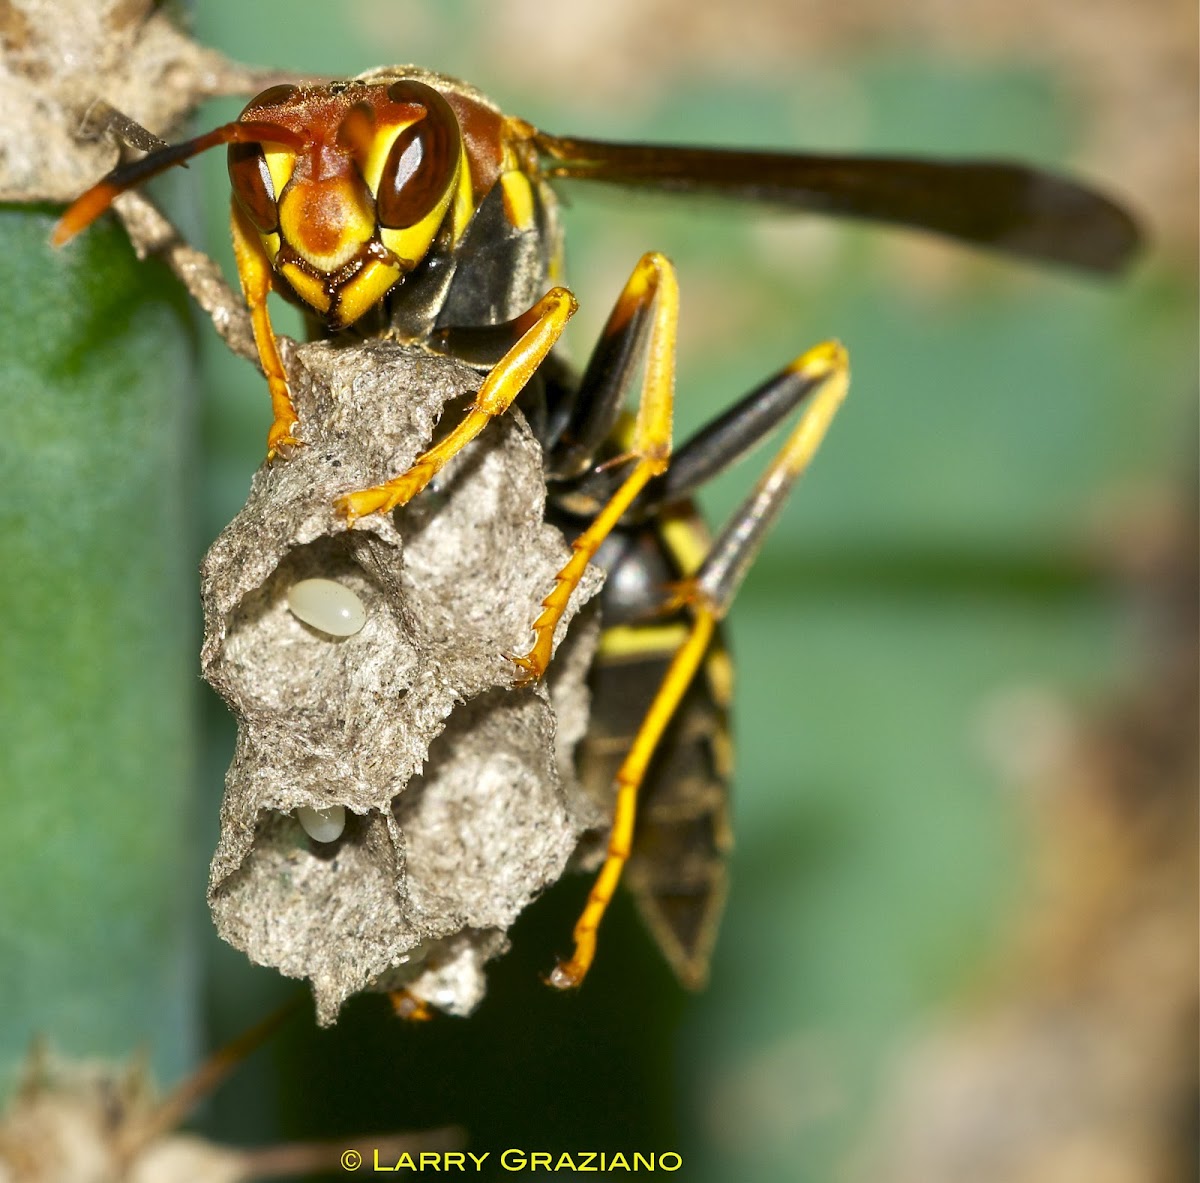 Wasp with Eggs in the Nest